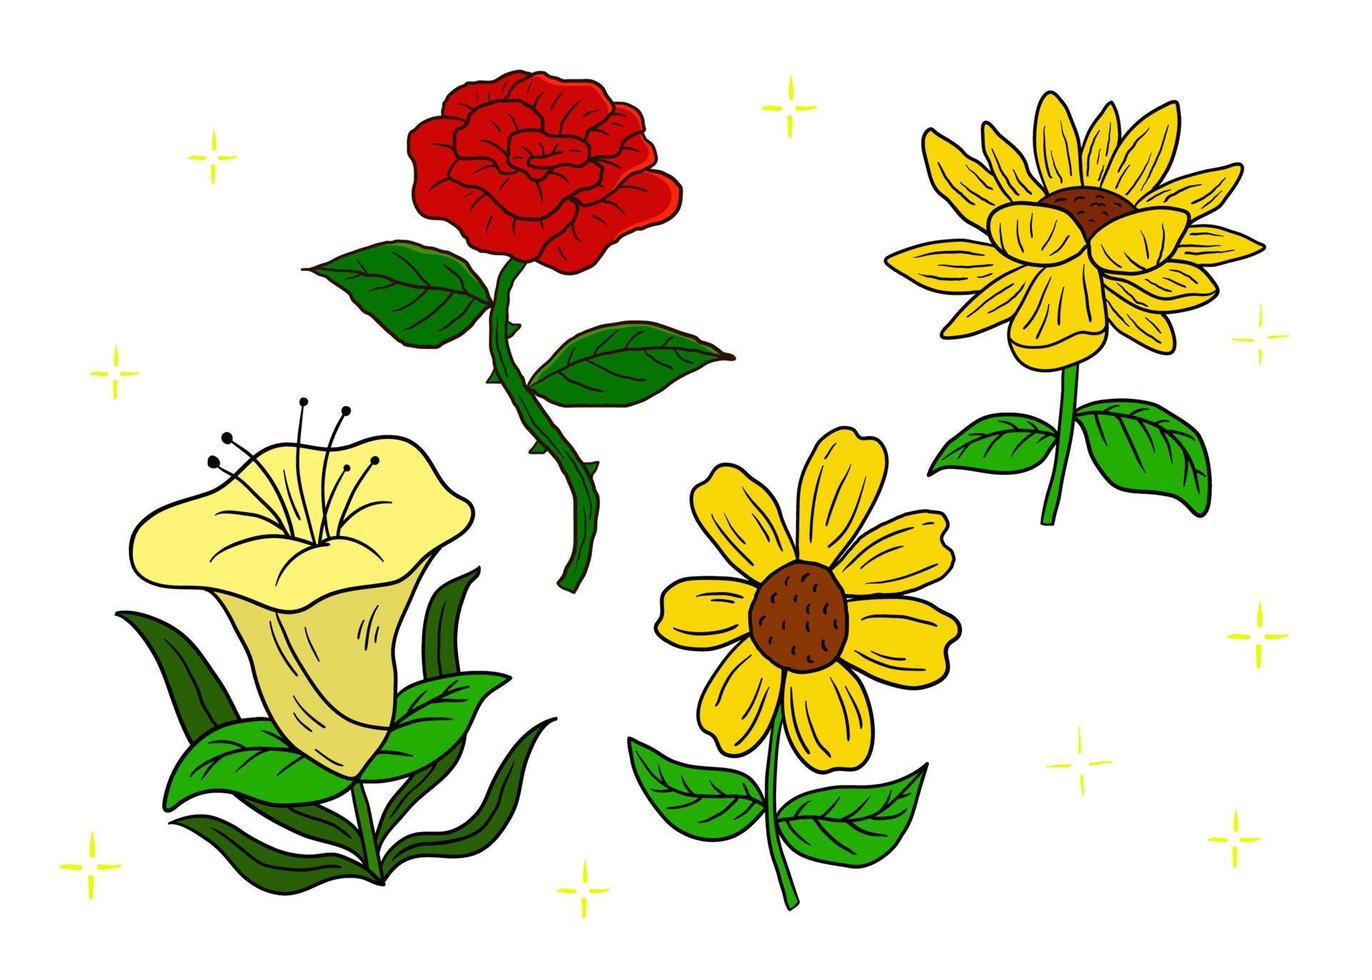 The Cute Flower Design Assets Vector Illustration. The Flowers Hand drawn Illustration